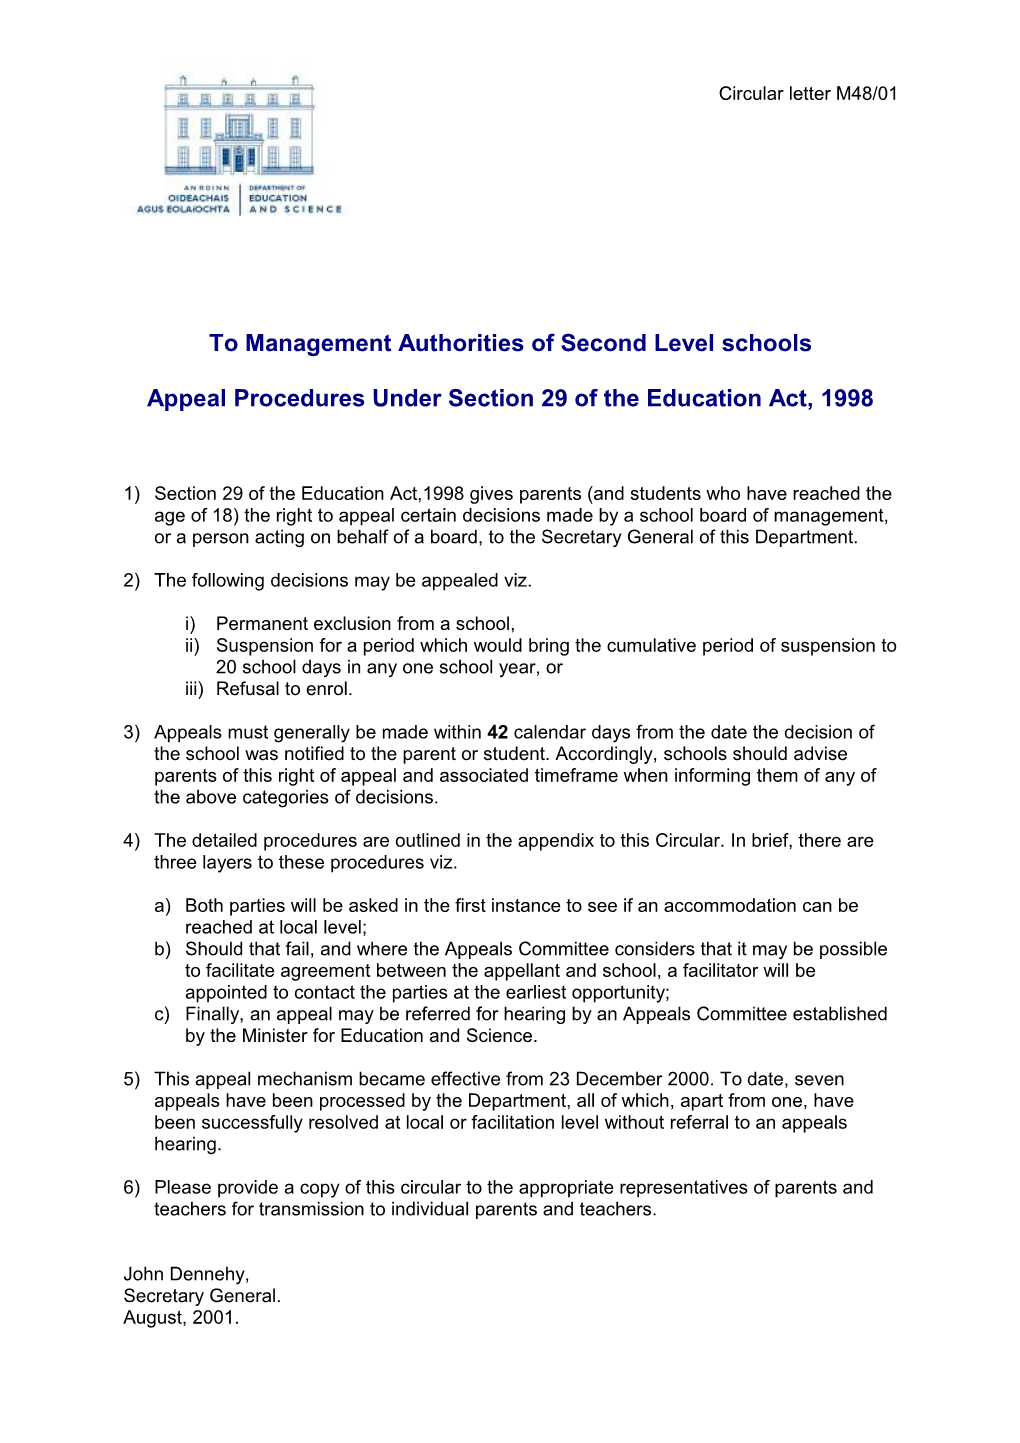 Circular M48/01 Appeal Procedures Under Section 29 of the Education Act, 1998. (File Word